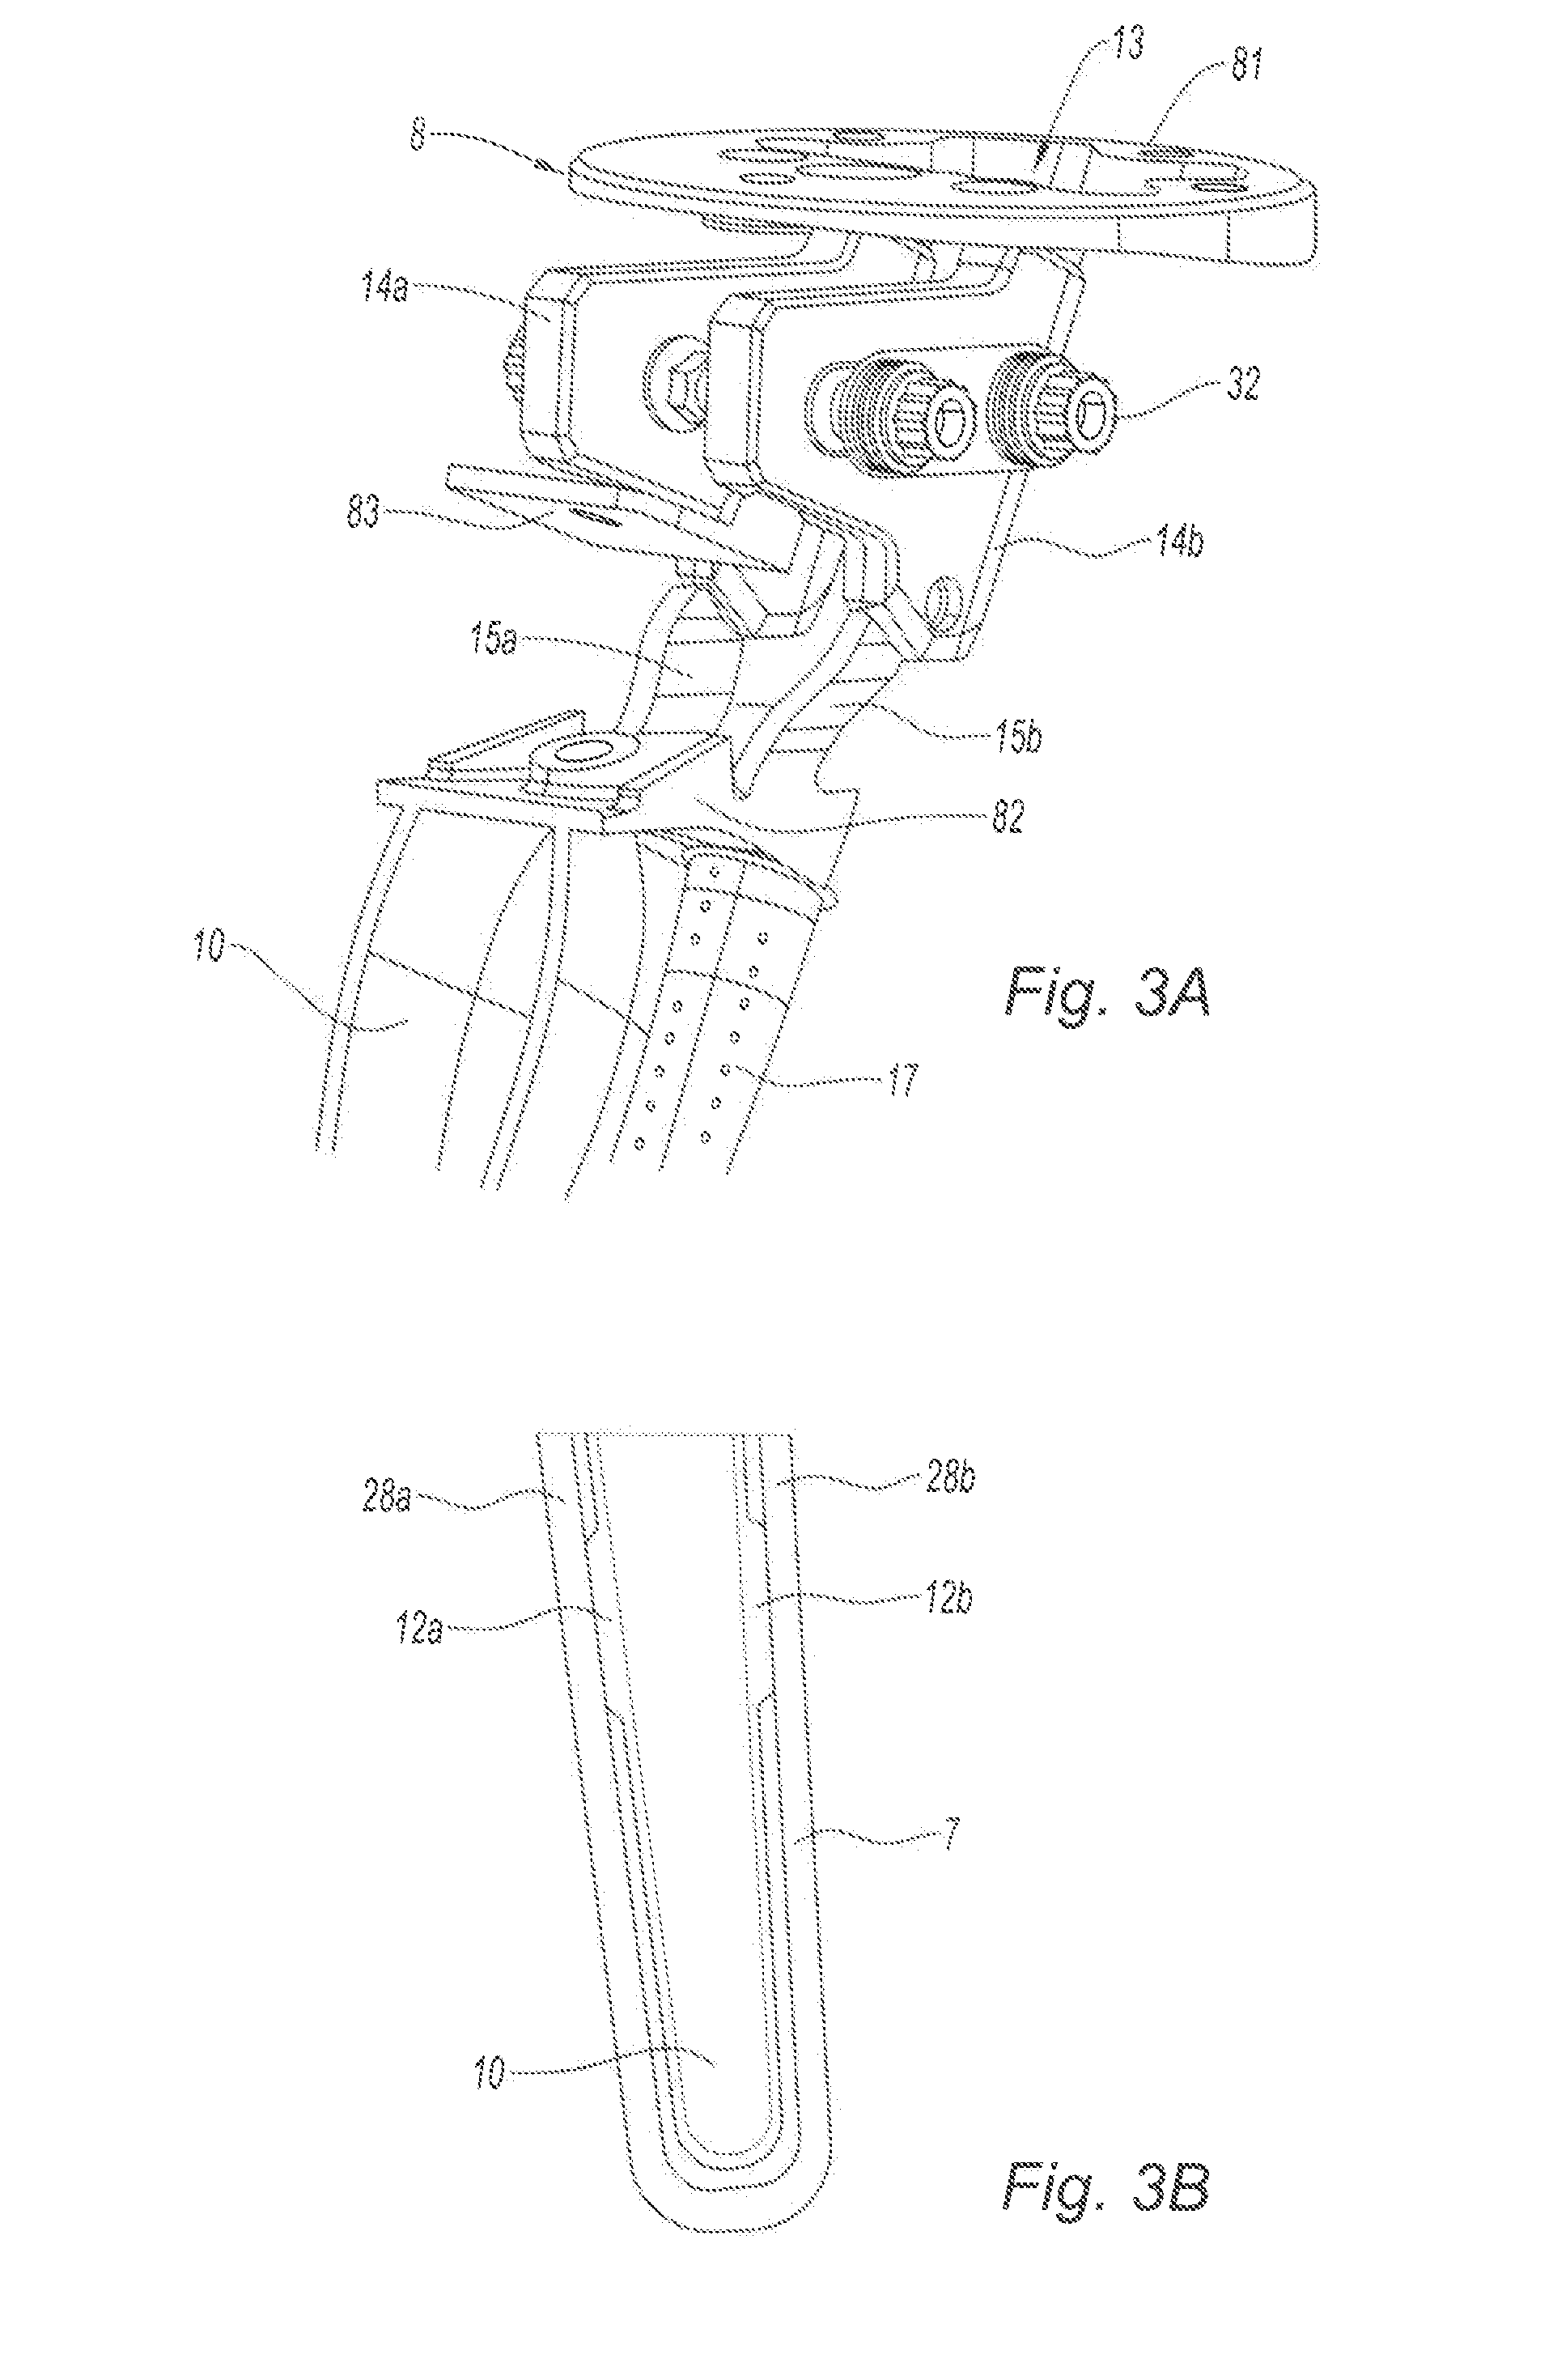 Flame-holder device comprising an arm support and a heat-protection screen that are in one piece